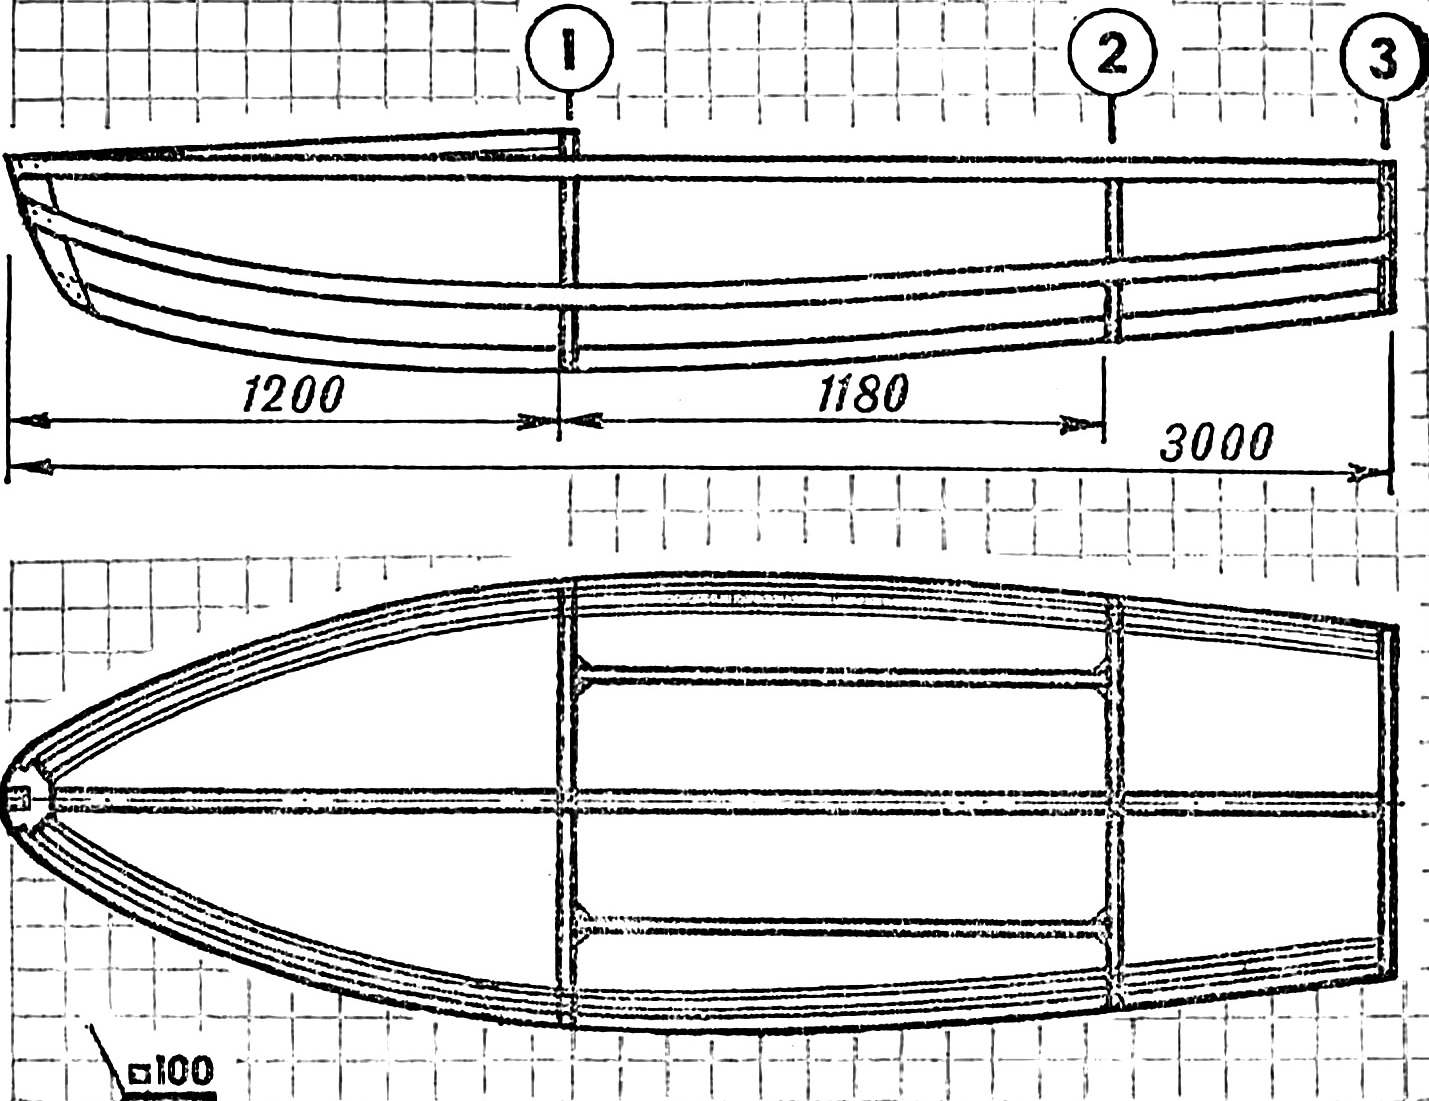 The frame of the Dinghy.